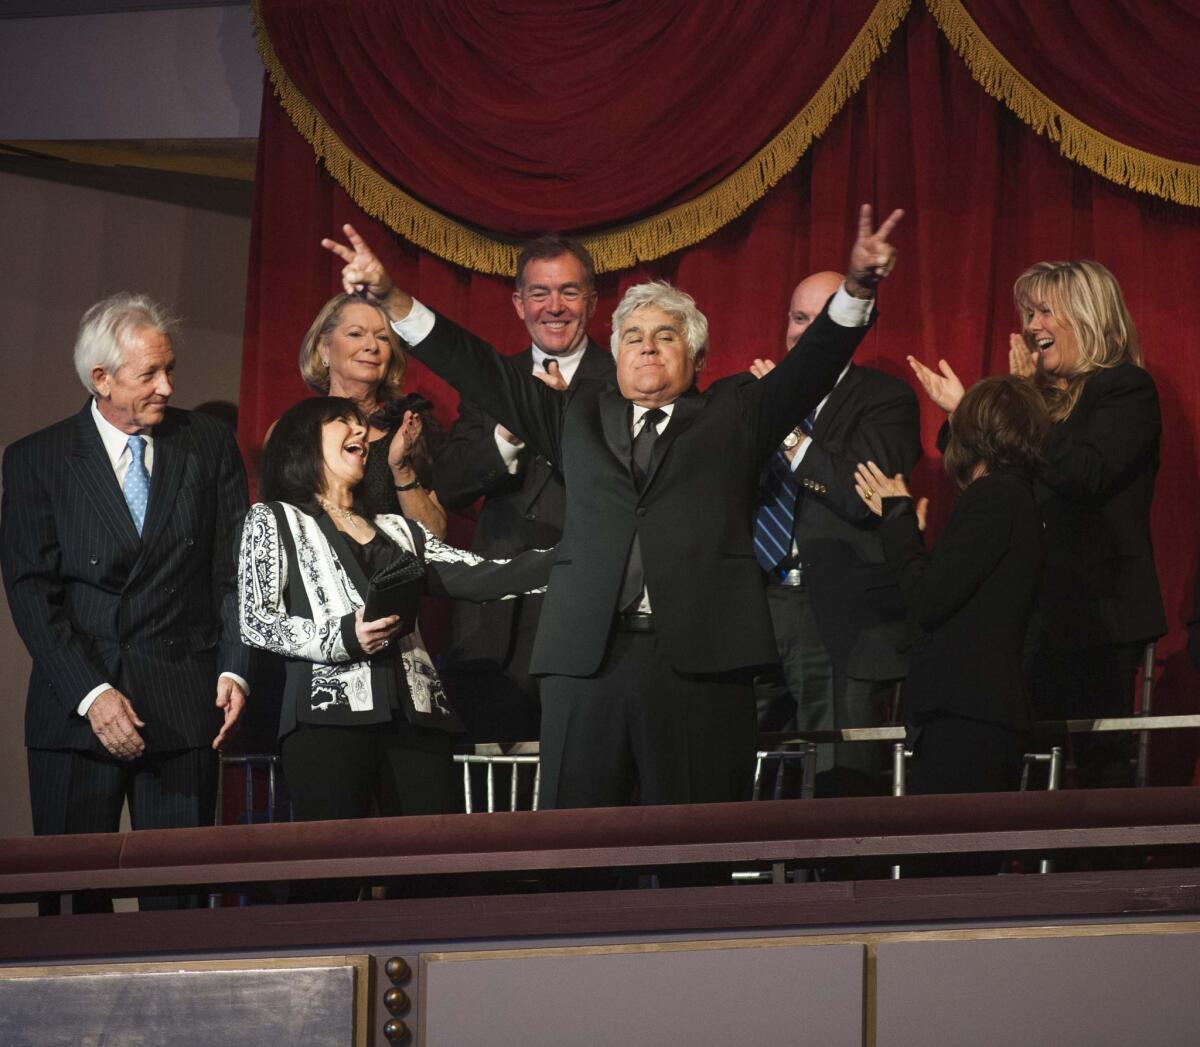 Jay Leno waves to the audience as he is announced at the Kennedy Center during the Mark Twain Prize for American Humor ceremony on Oct. 19.